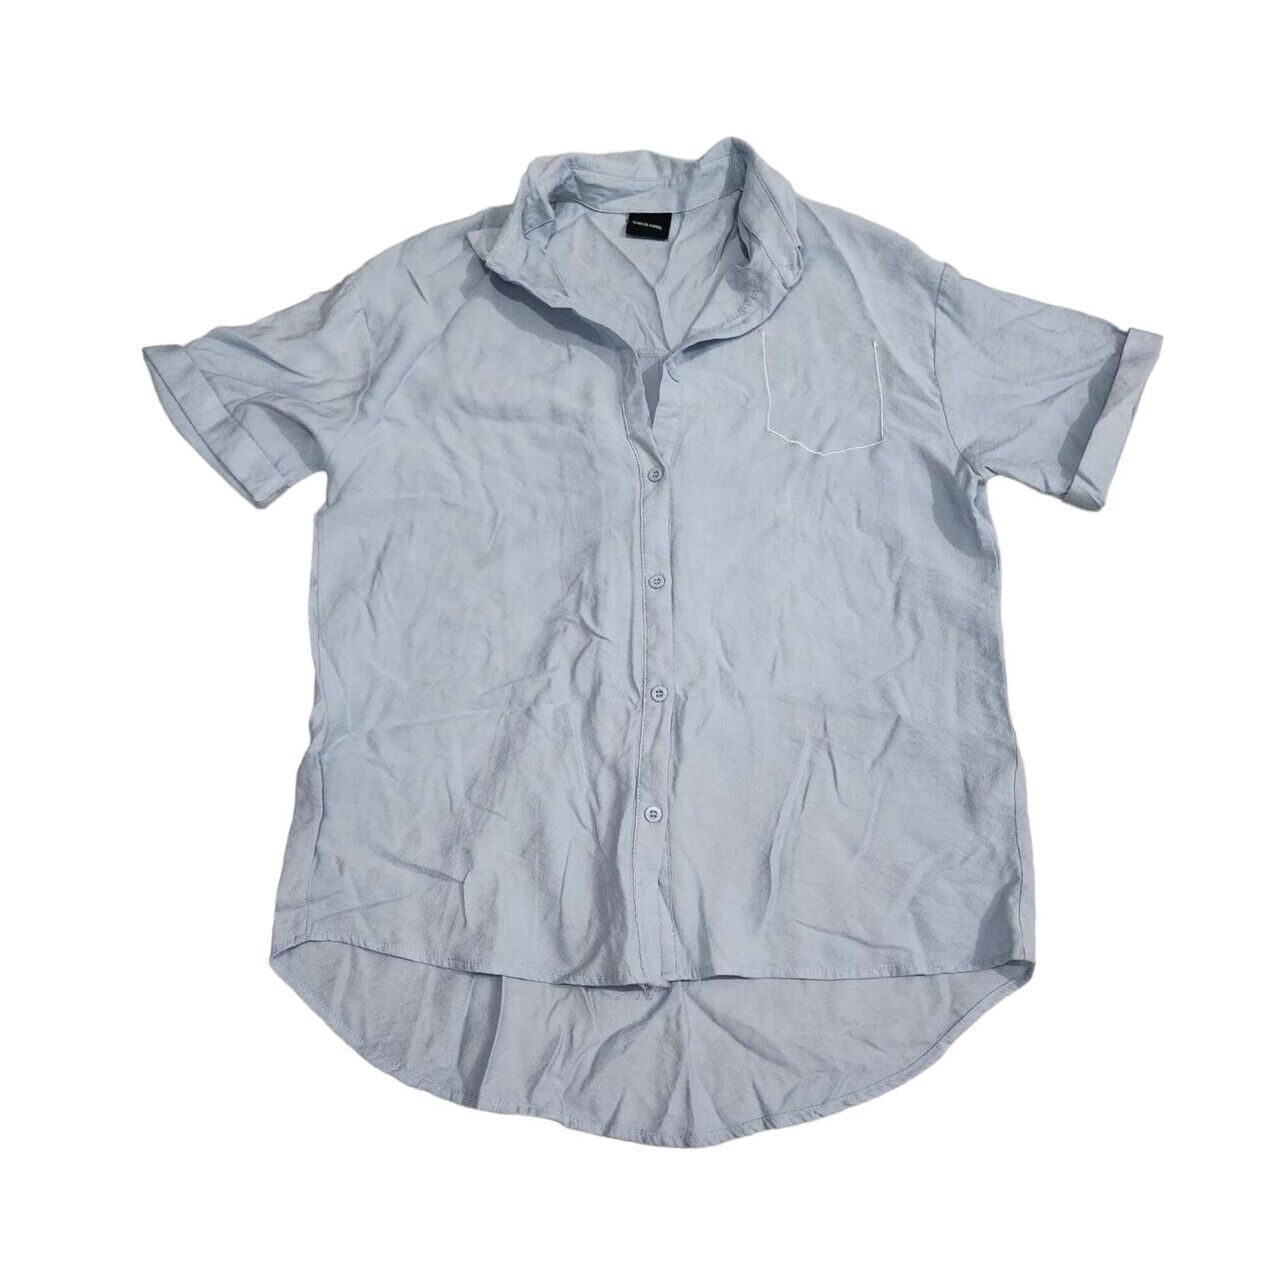 This is April Blue Shirt